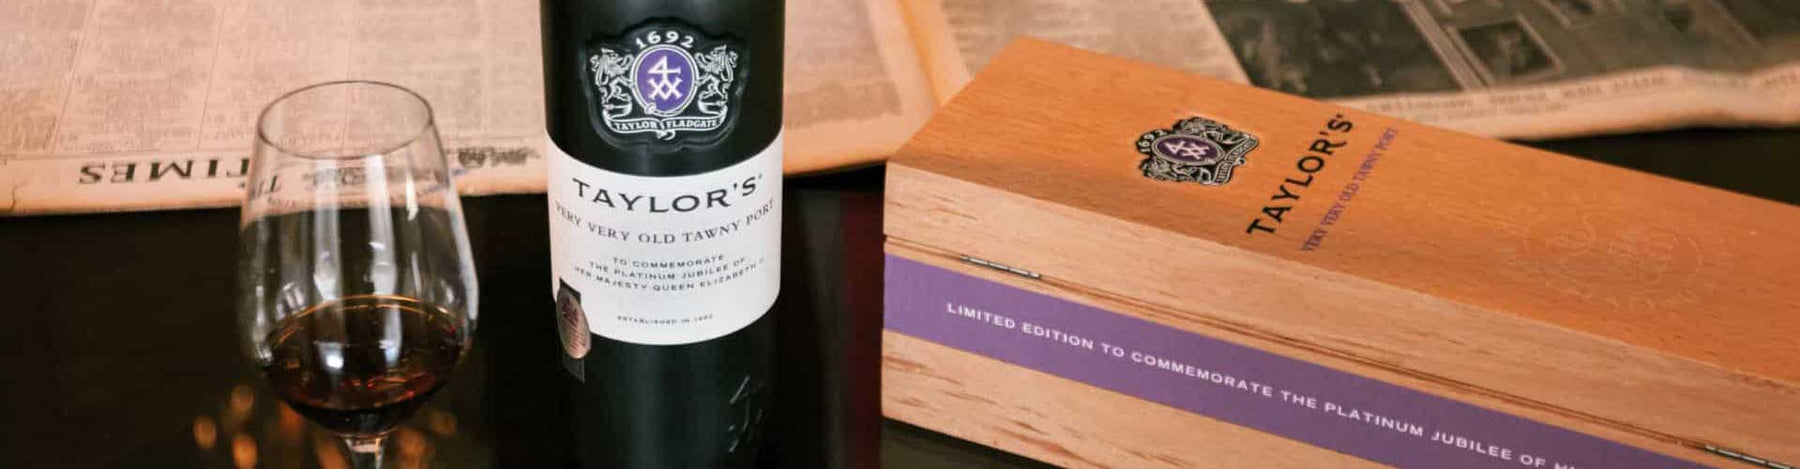 Taylors Port Limited Edition To Celebrate The Queens Platinum Jubilee